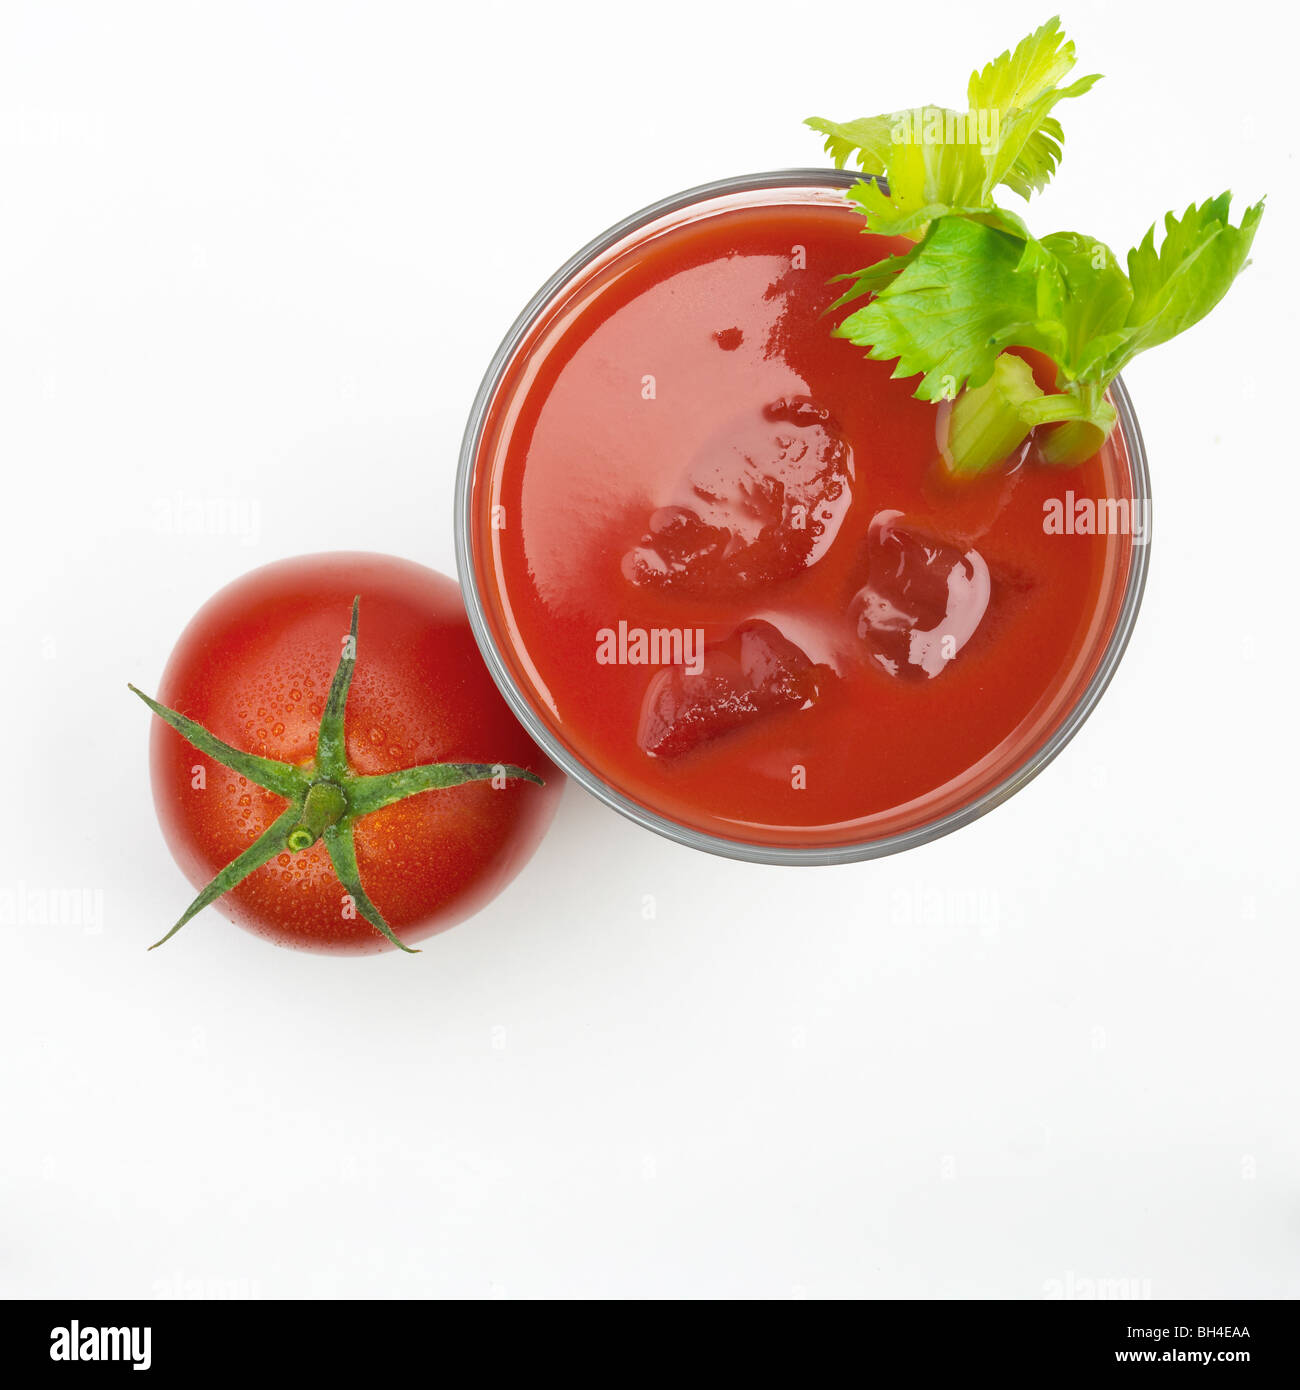 Glass of tomato juice and a whole tomato on a white background Stock Photo